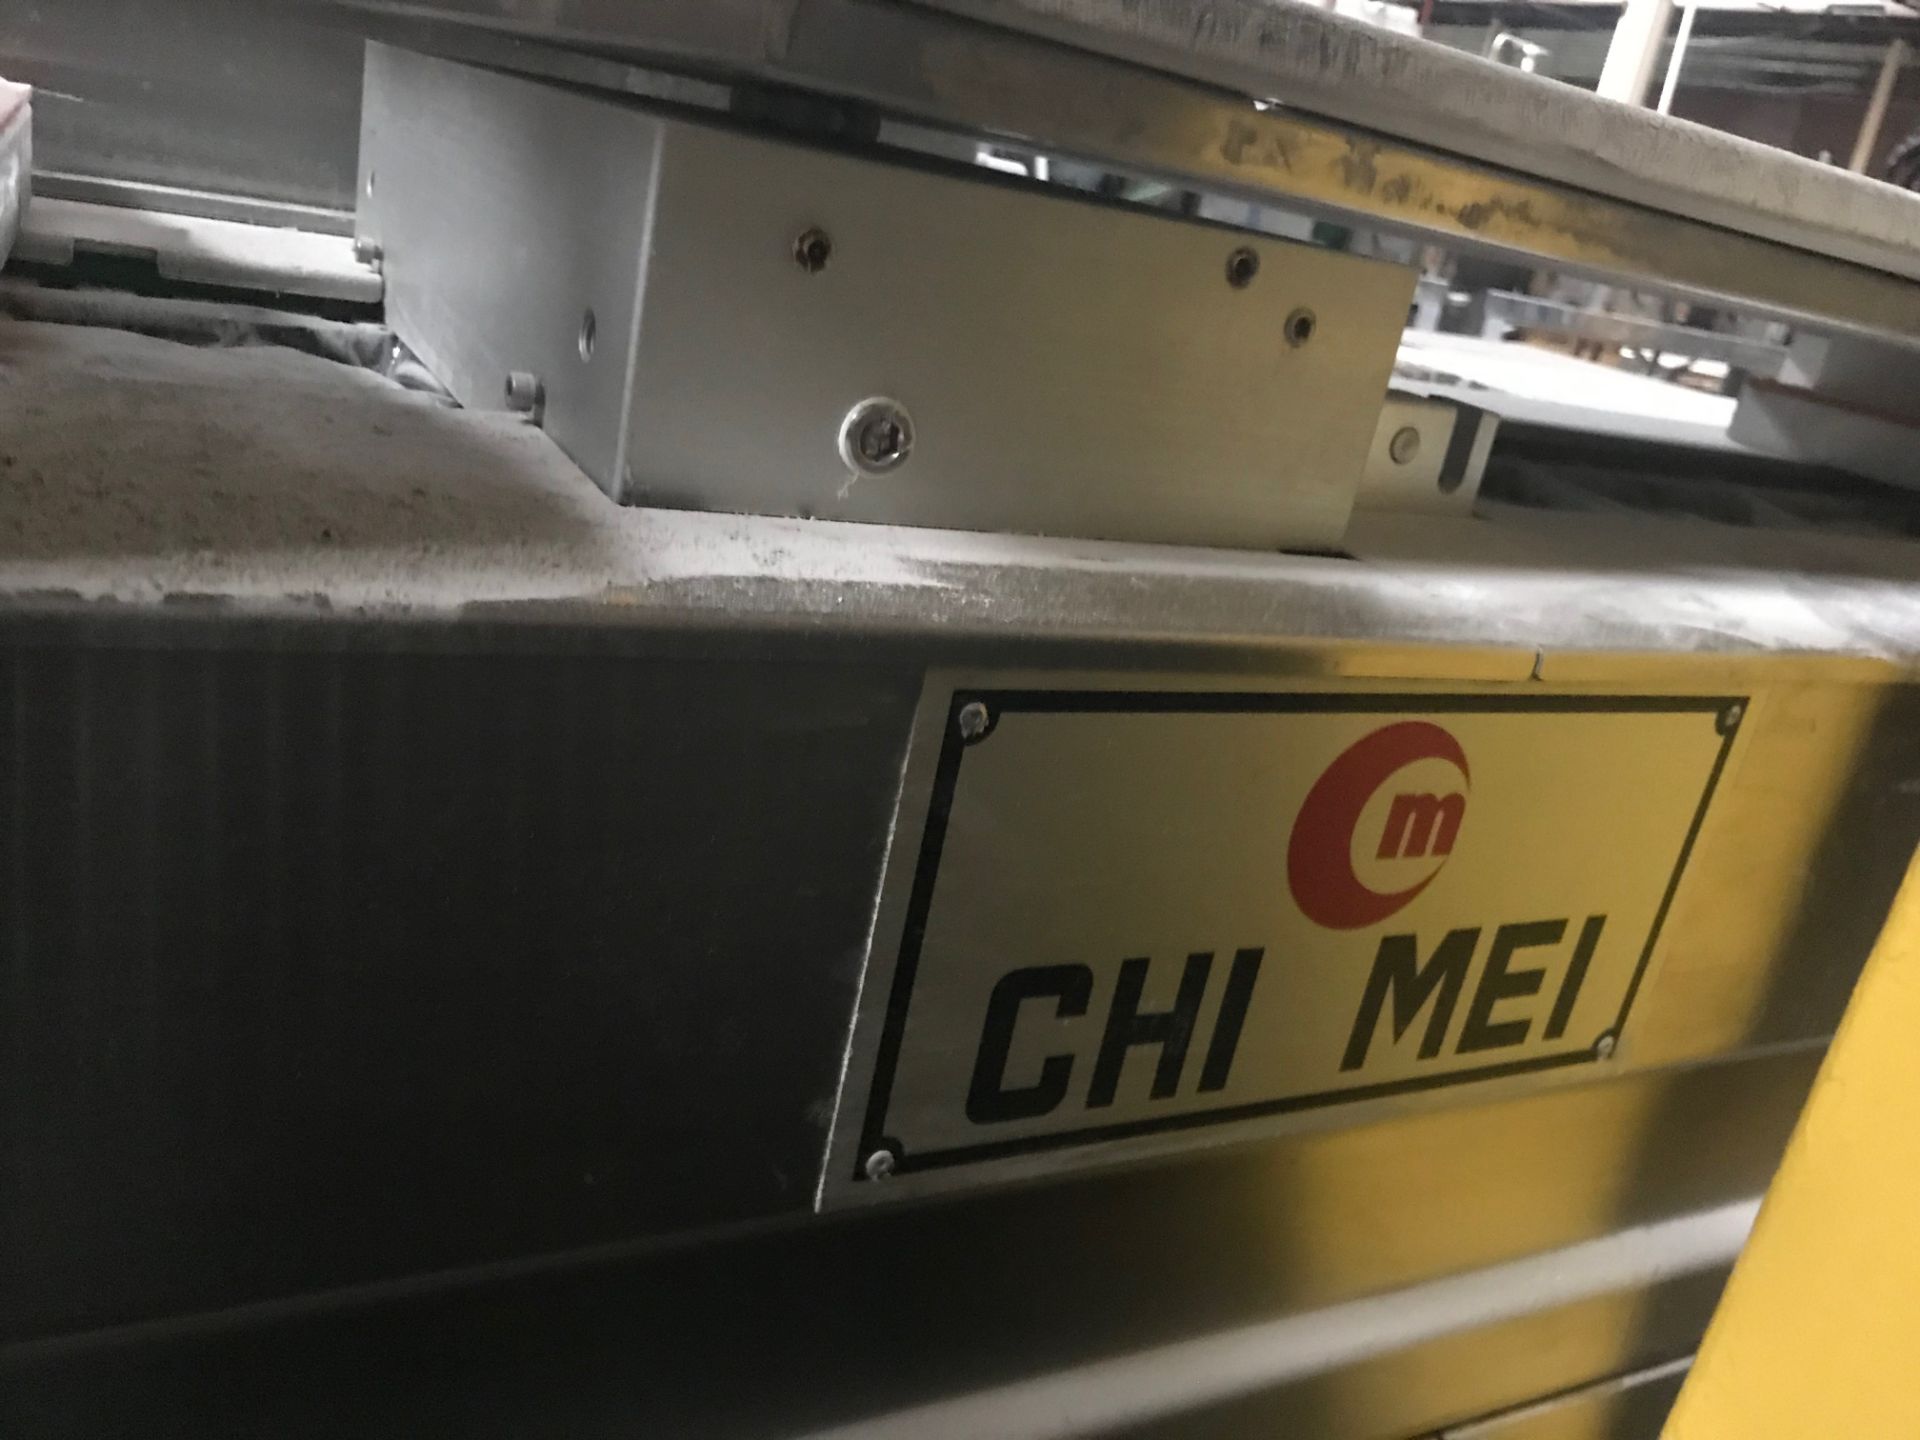 Chei Mei Automatic Packaging Machine, Serial# 14951, 220 Volts, 60 Hz - Image 4 of 6